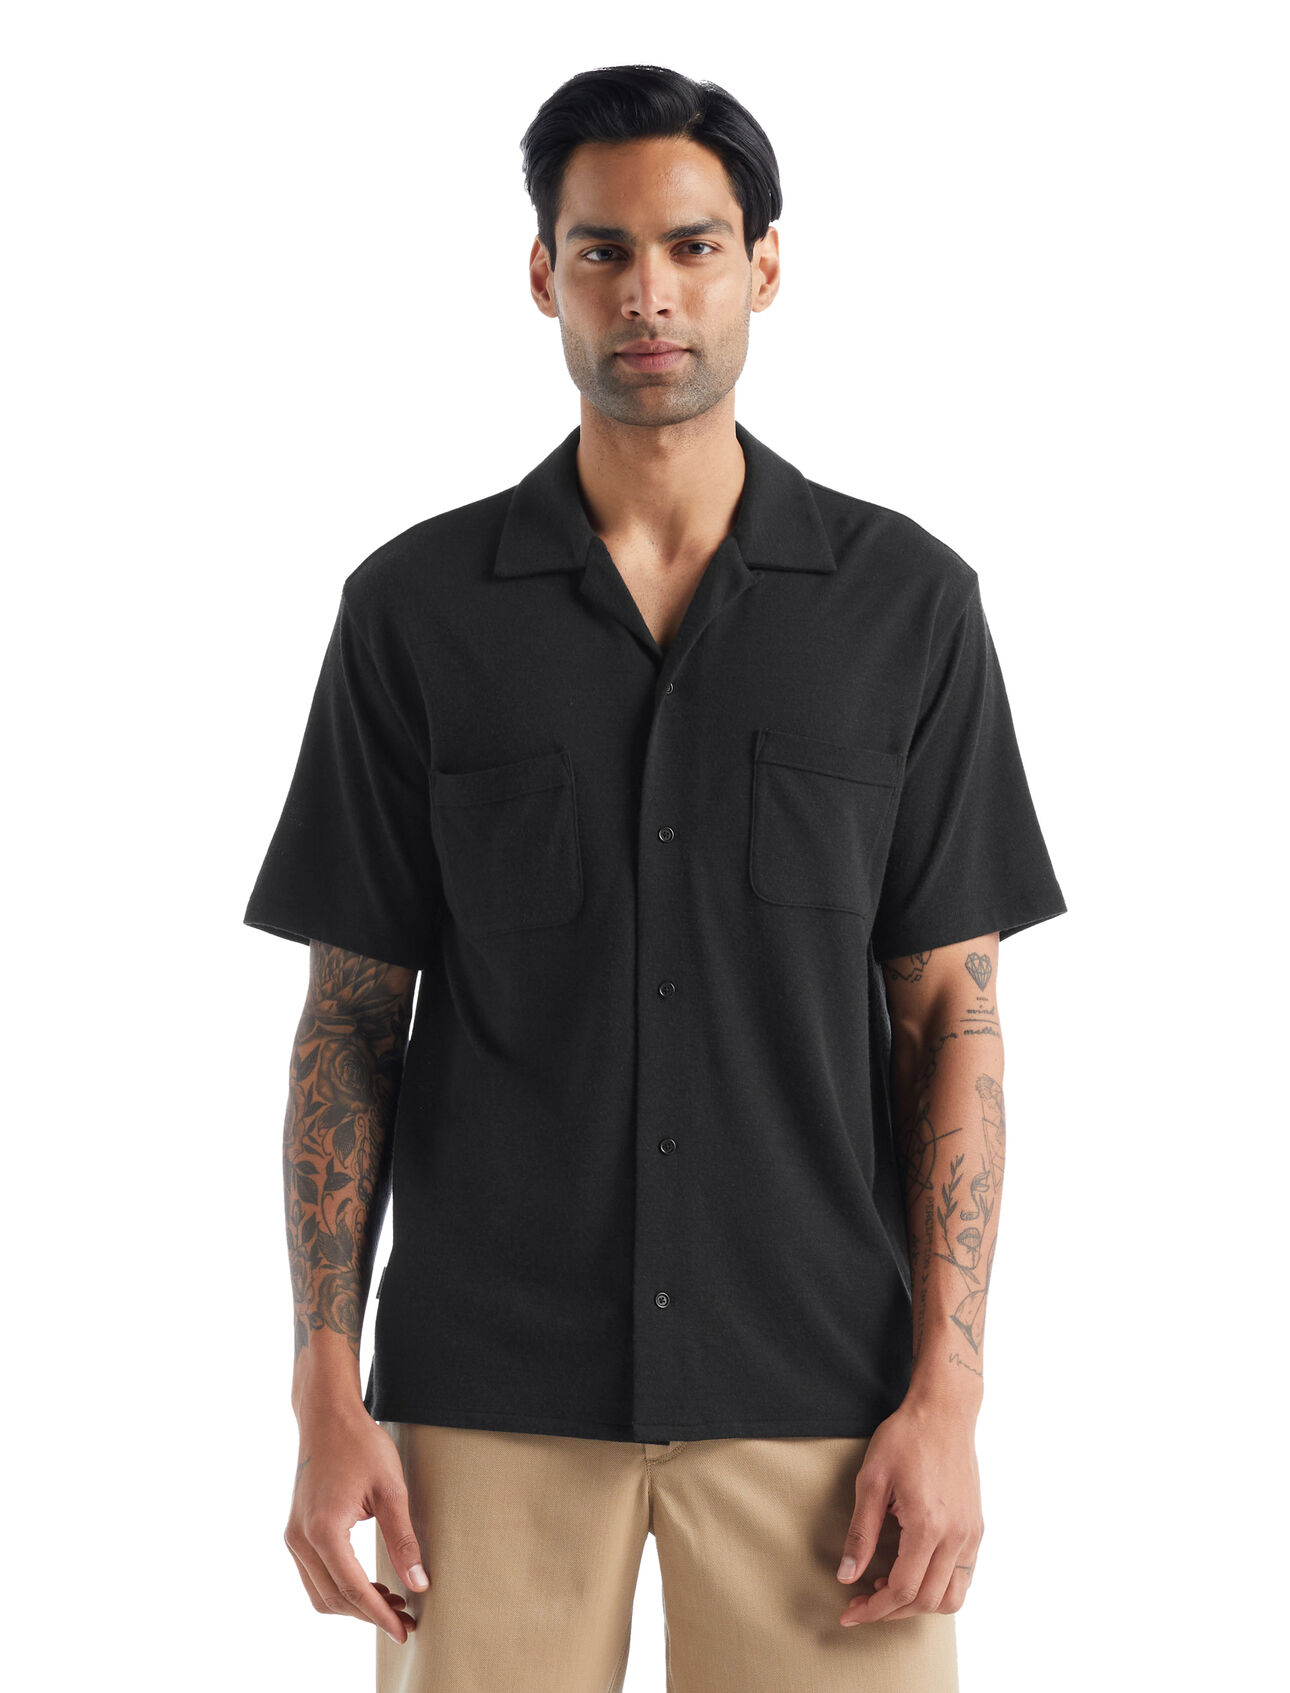 Mens Merino Pankow Short Sleeve Shirt A stylish button-up shirt with the comfort and breathability of 100% merino wool, the Pankow Short Sleeve Shirt offers all-natural, everyday versatility.